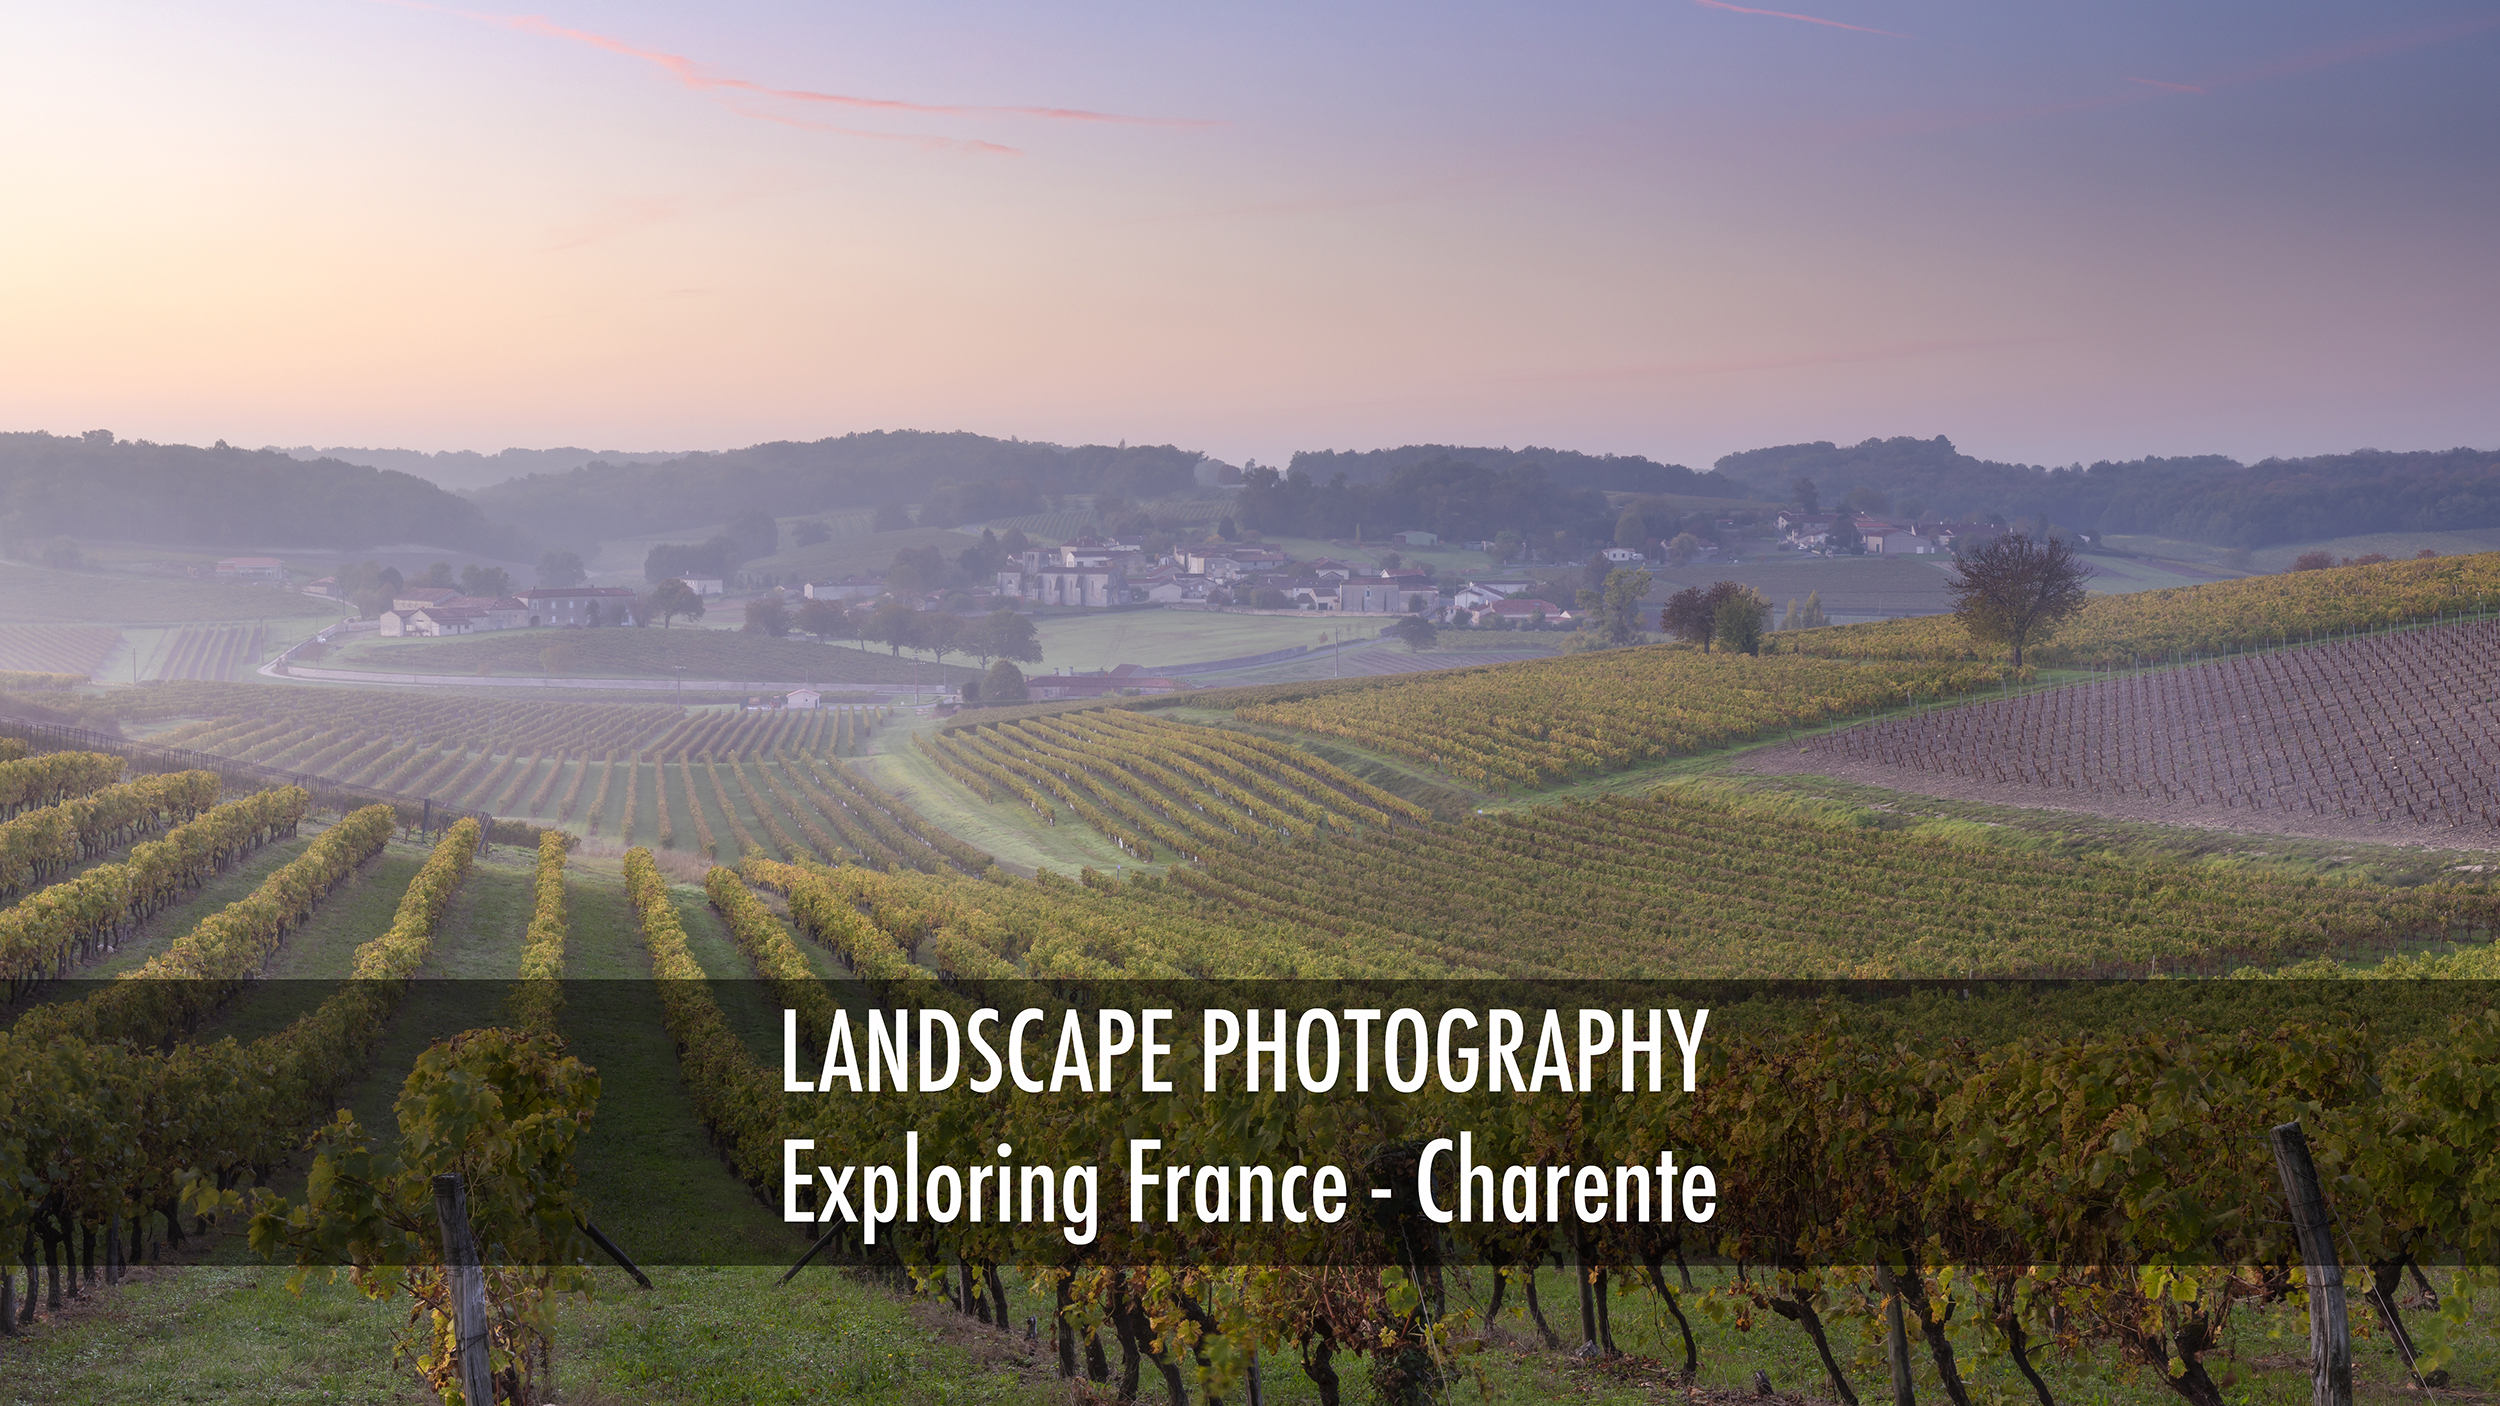 Exploring France in the department of Charente. Landscape photography.